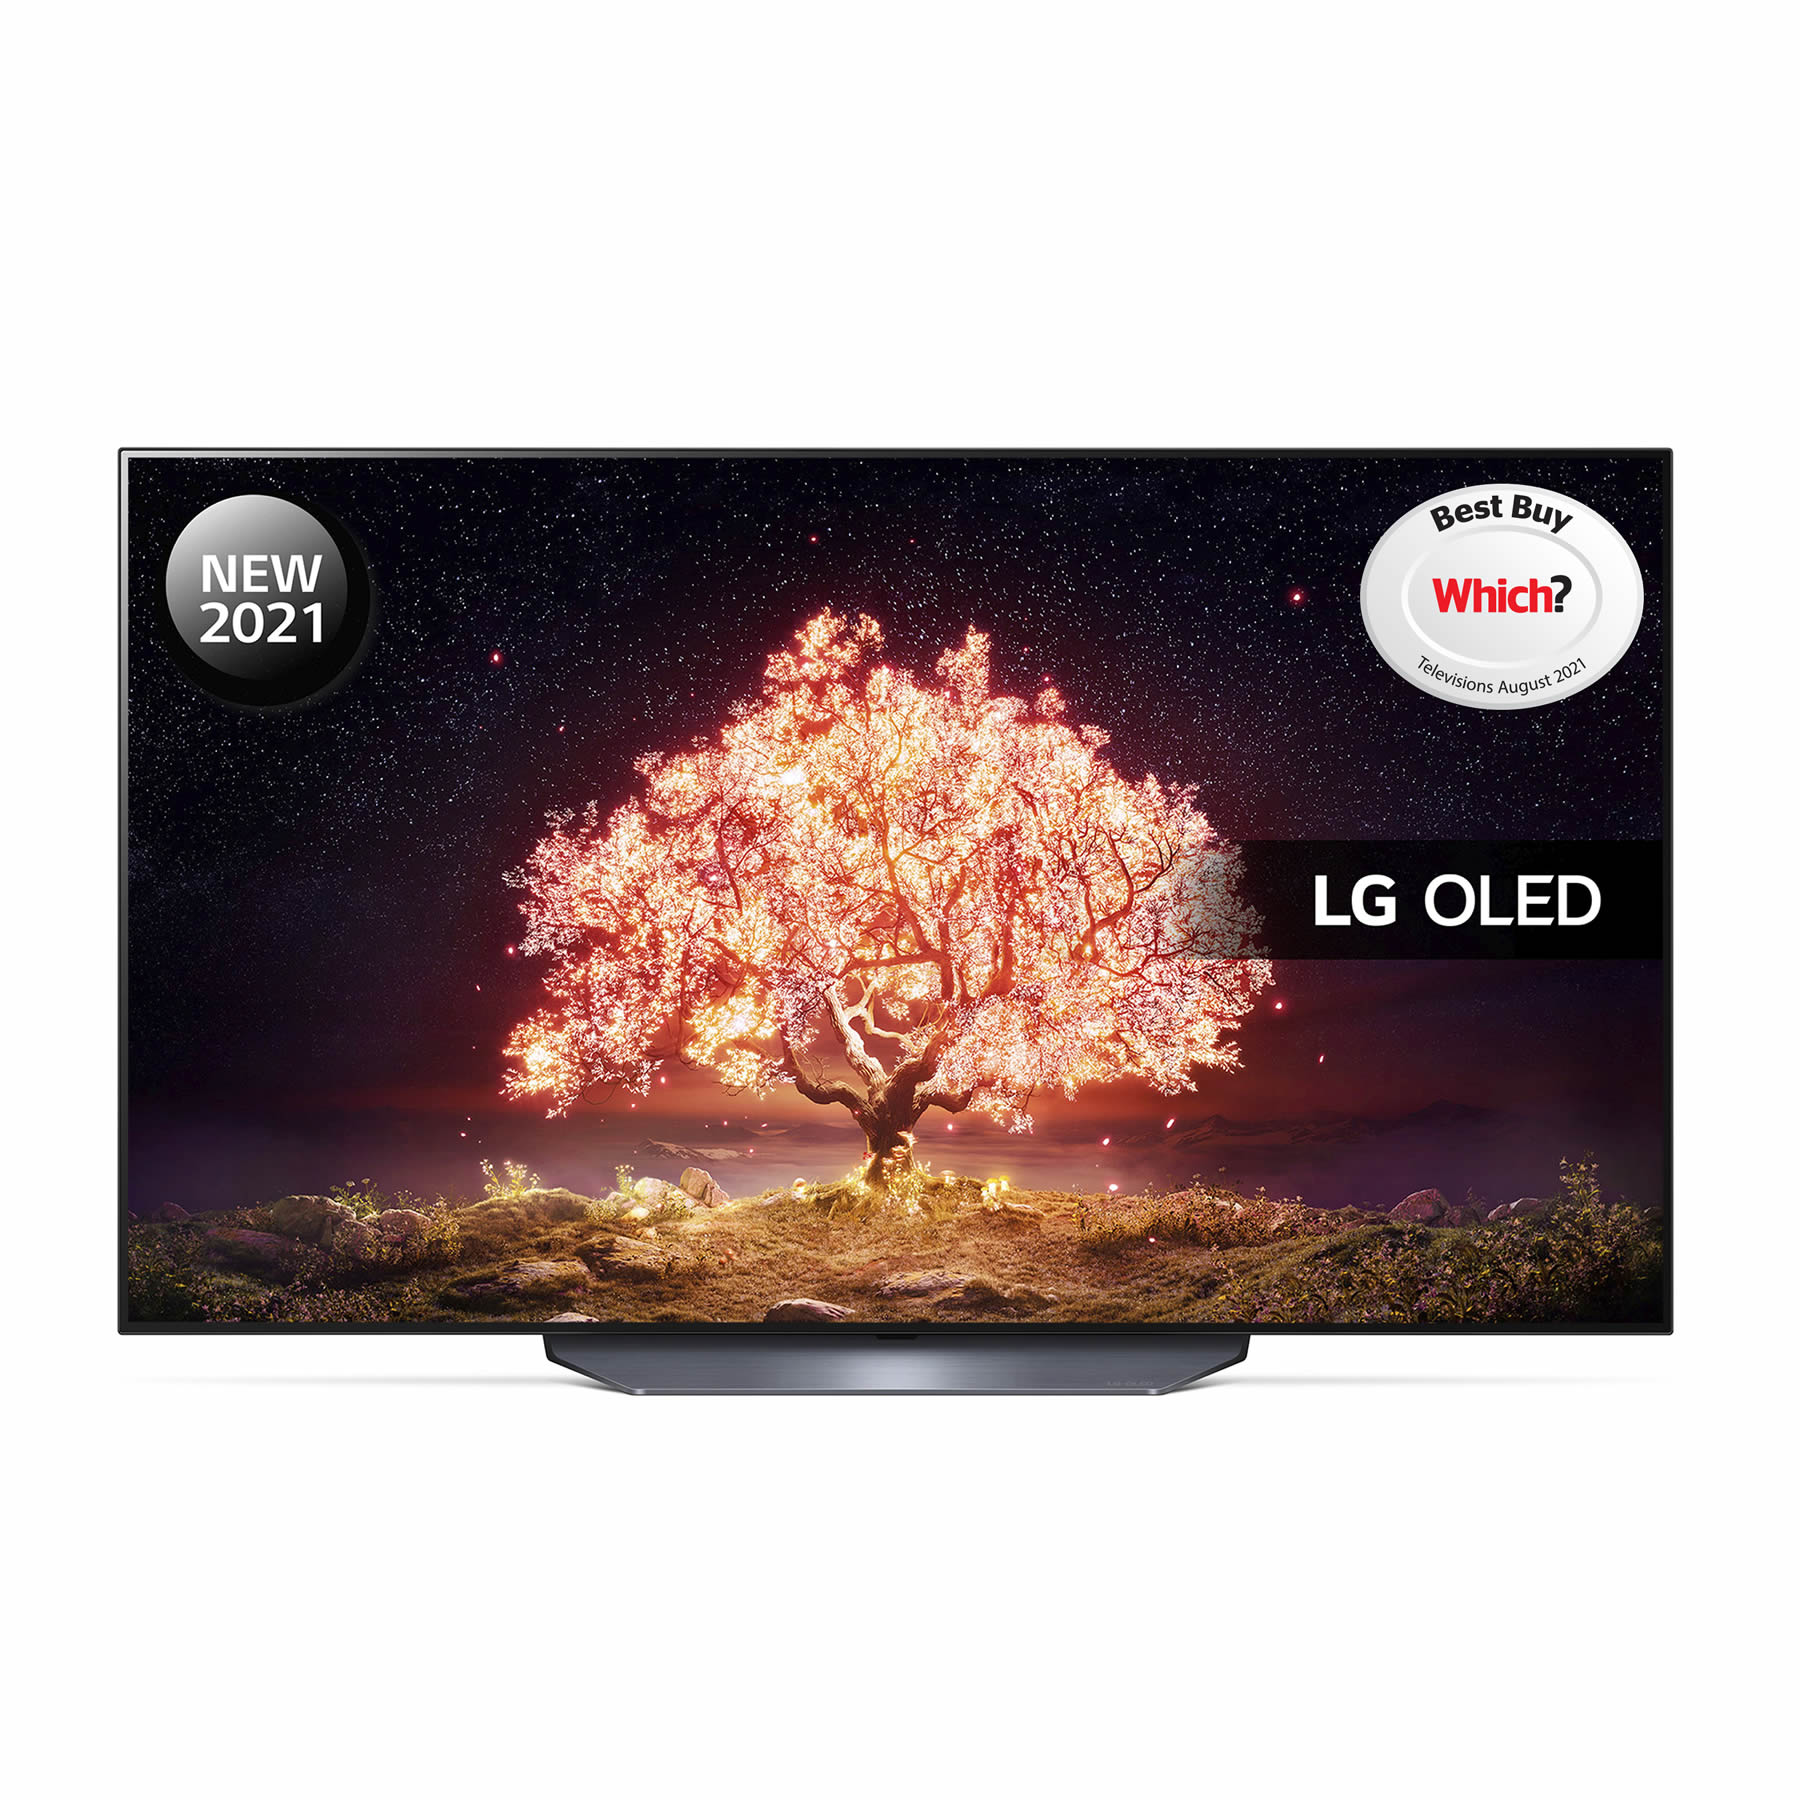 LG 55inch OLED HDR 4K UHD SMART TV WiFi Dolby Atmos